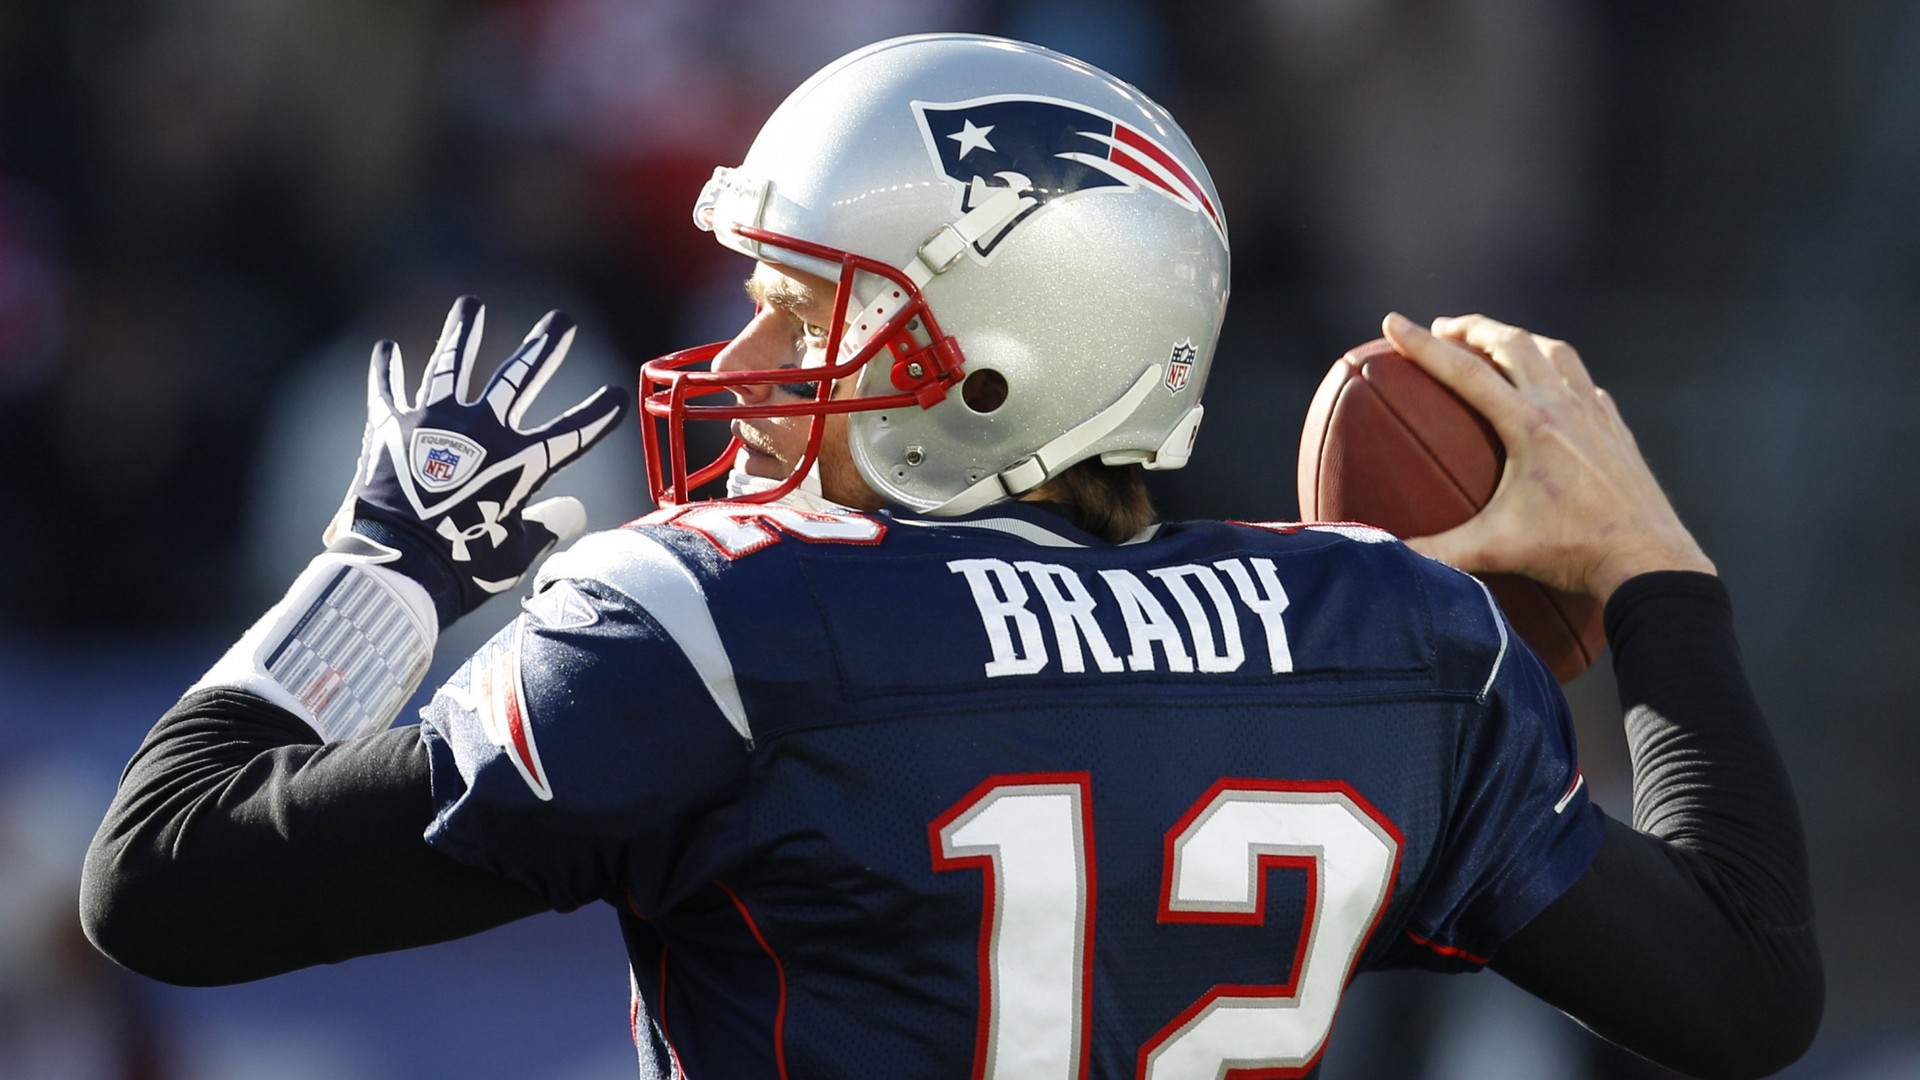 Wallpaper Tom Brady Super Bowl HD with image resolution 1920x1080 pixel. You can make this wallpaper for your Desktop Computer Backgrounds, Mac Wallpapers, Android Lock screen or iPhone Screensavers